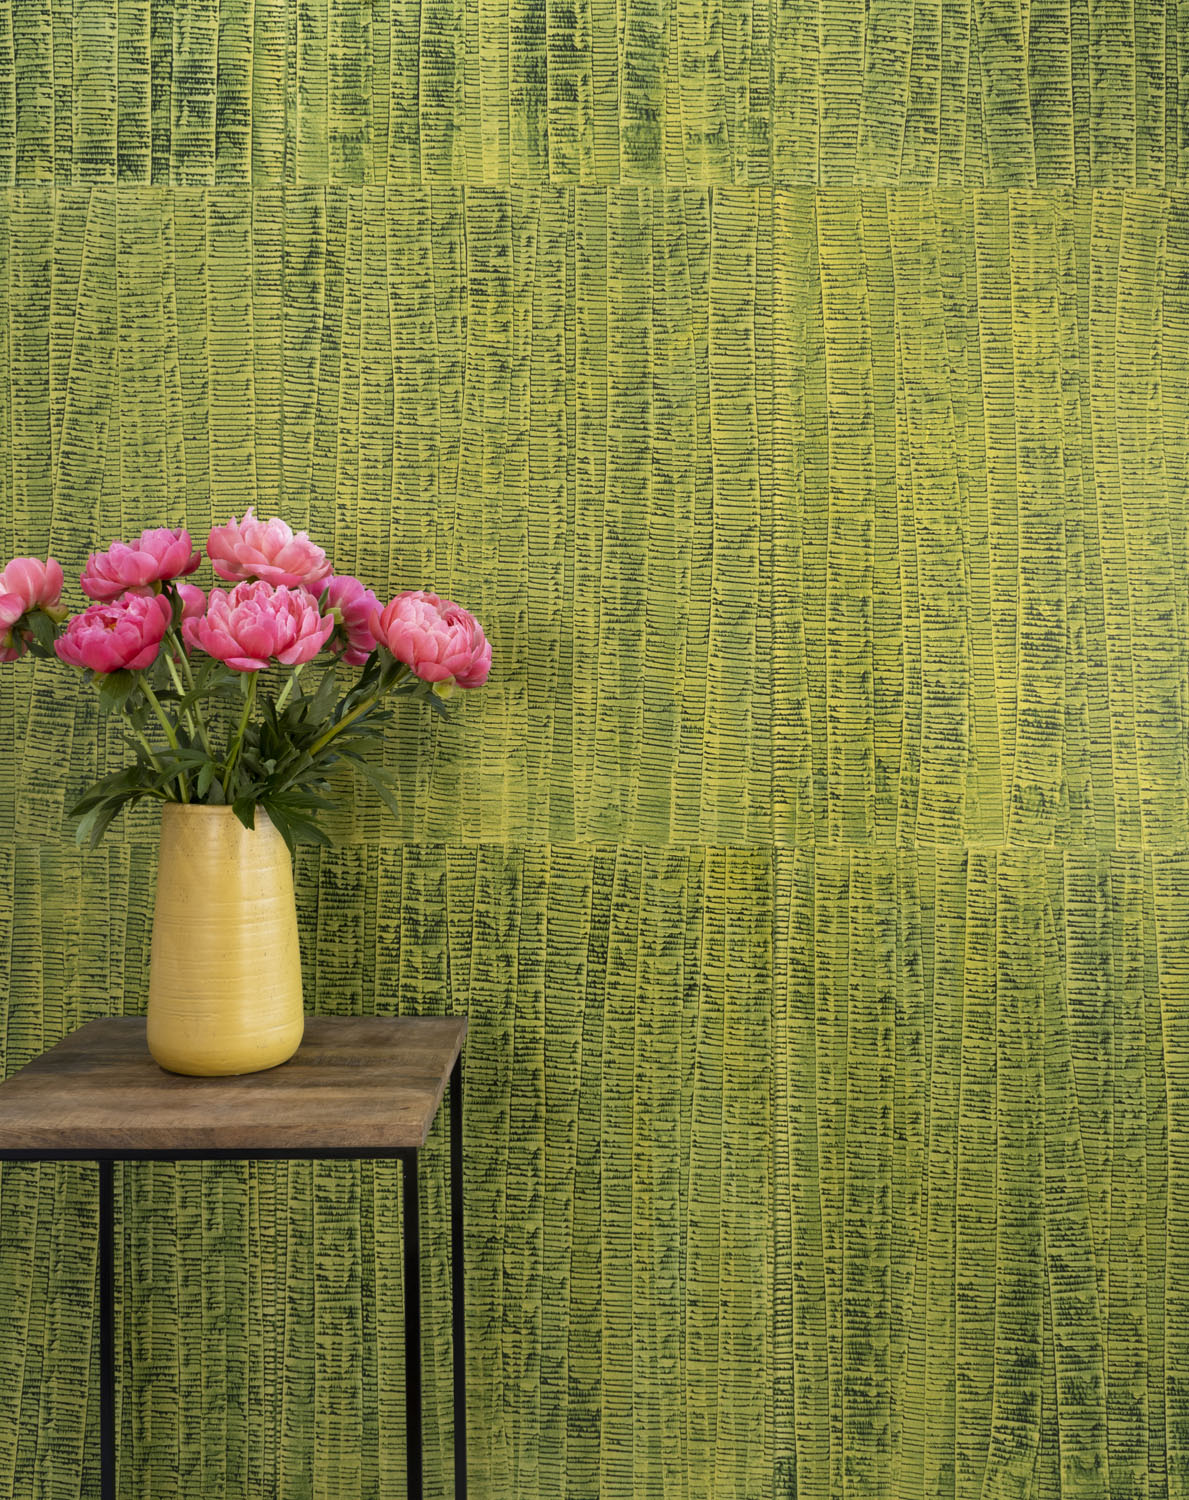 A vase of flowers stands in front of a wall papered in an undulating ribbon pattern in green on a gold field.